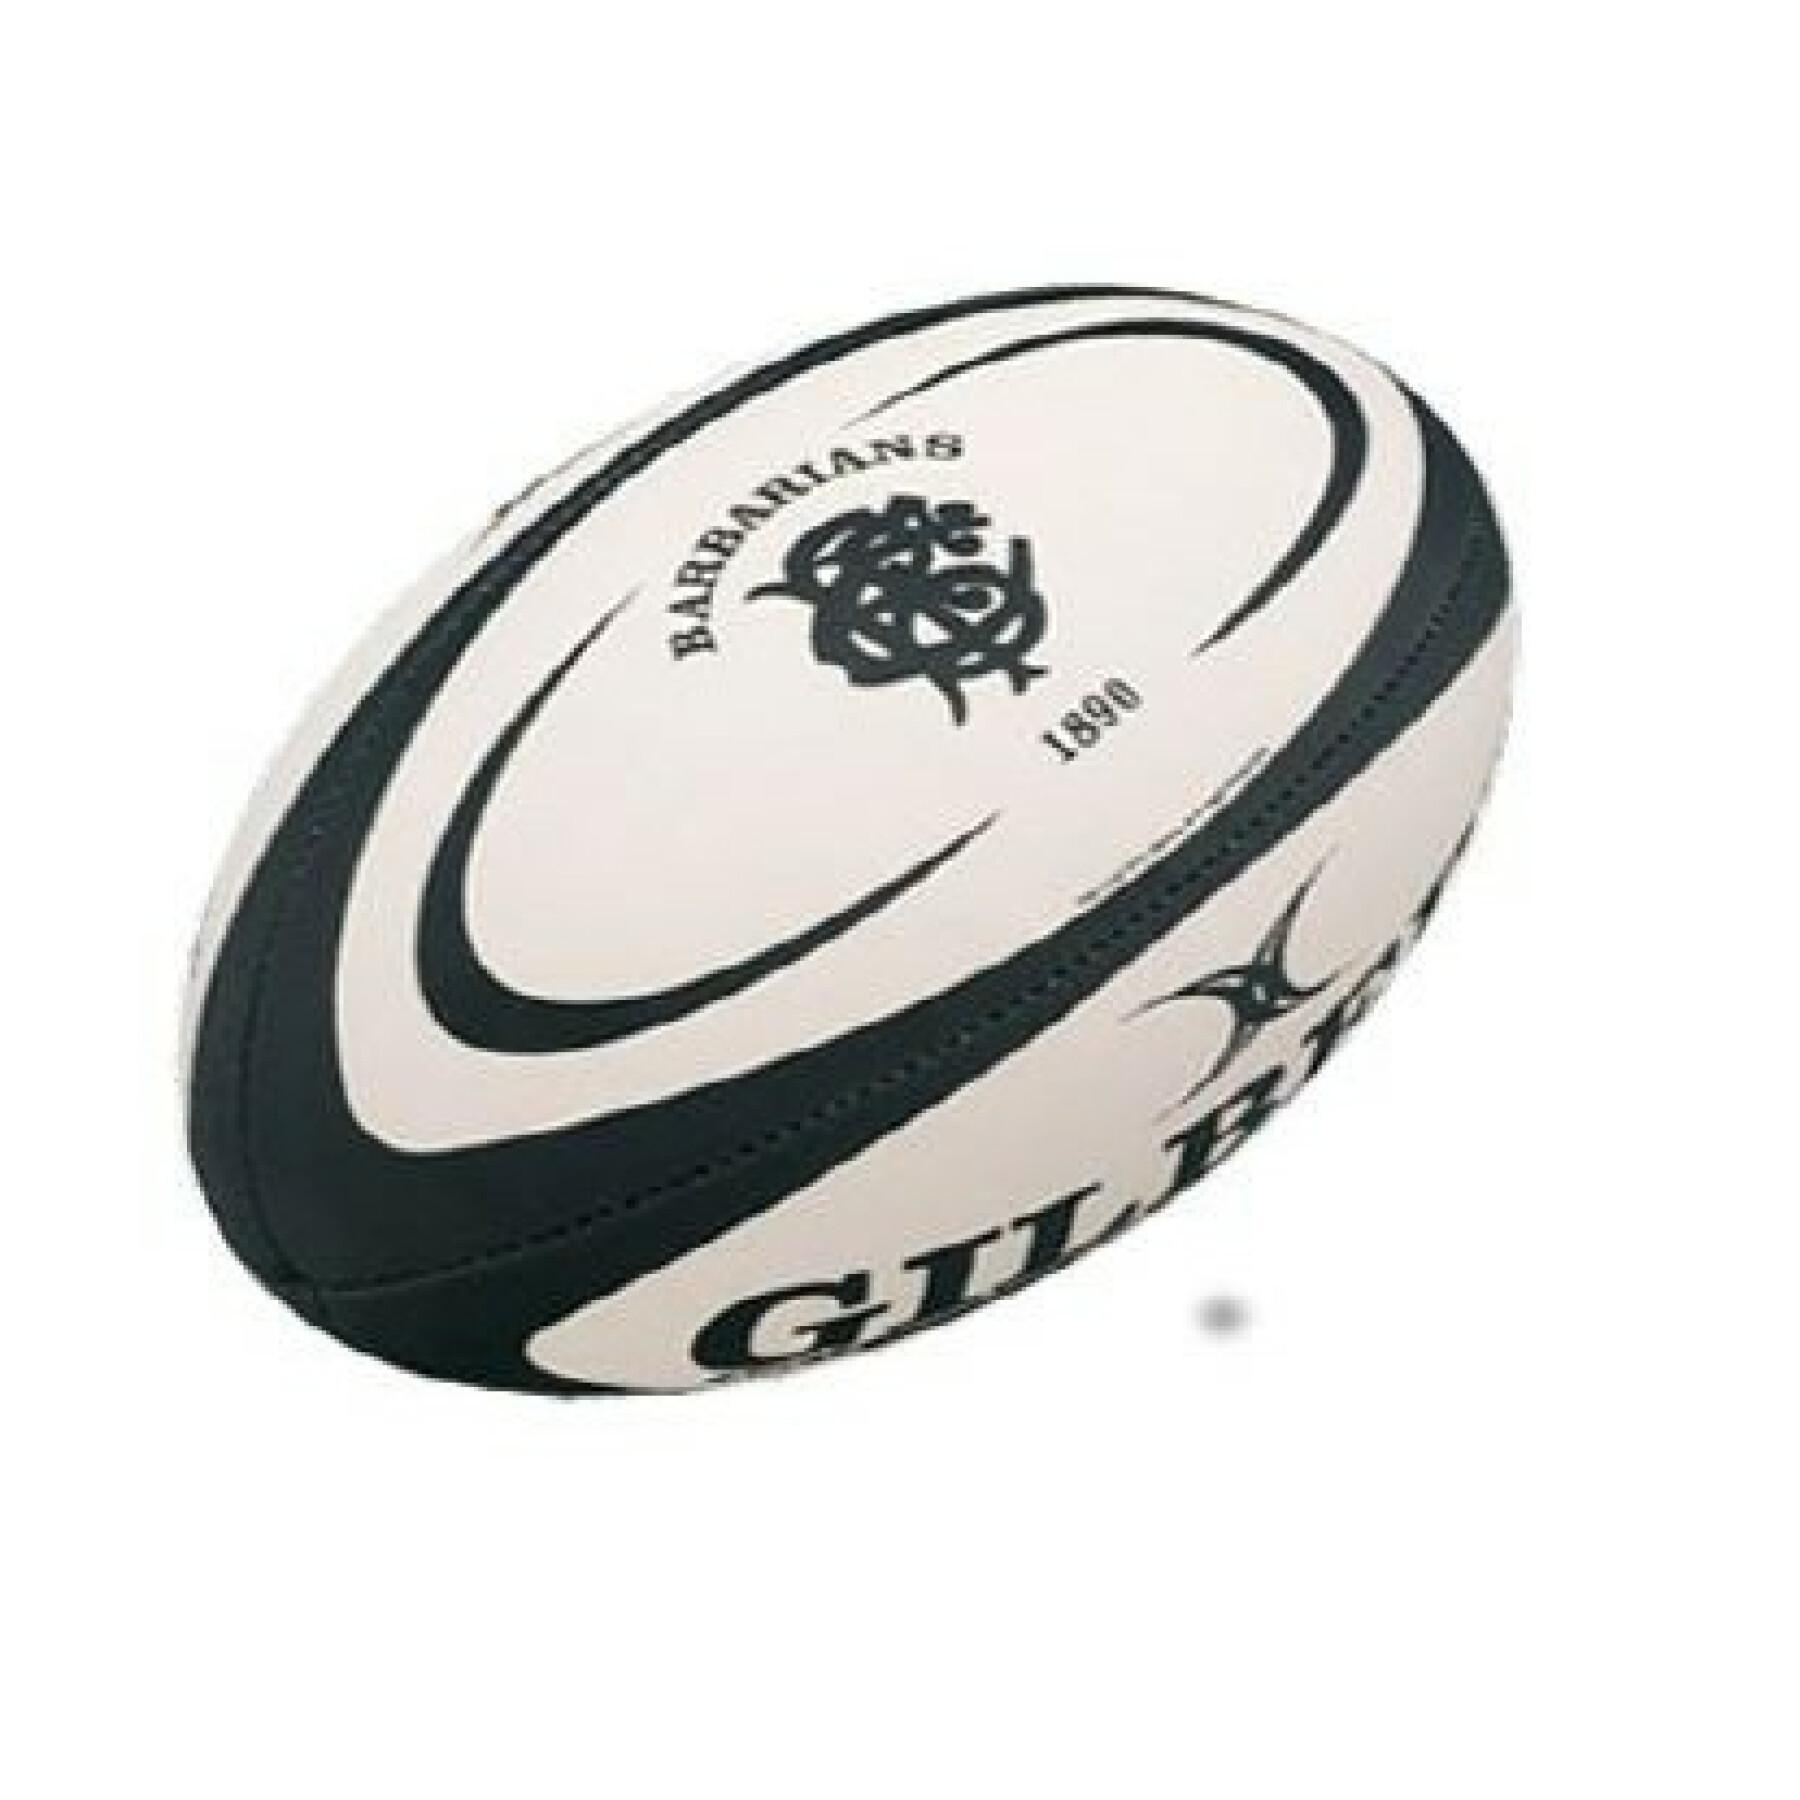 Rugby ball Gilbert Barbarians Replica (taille 5)